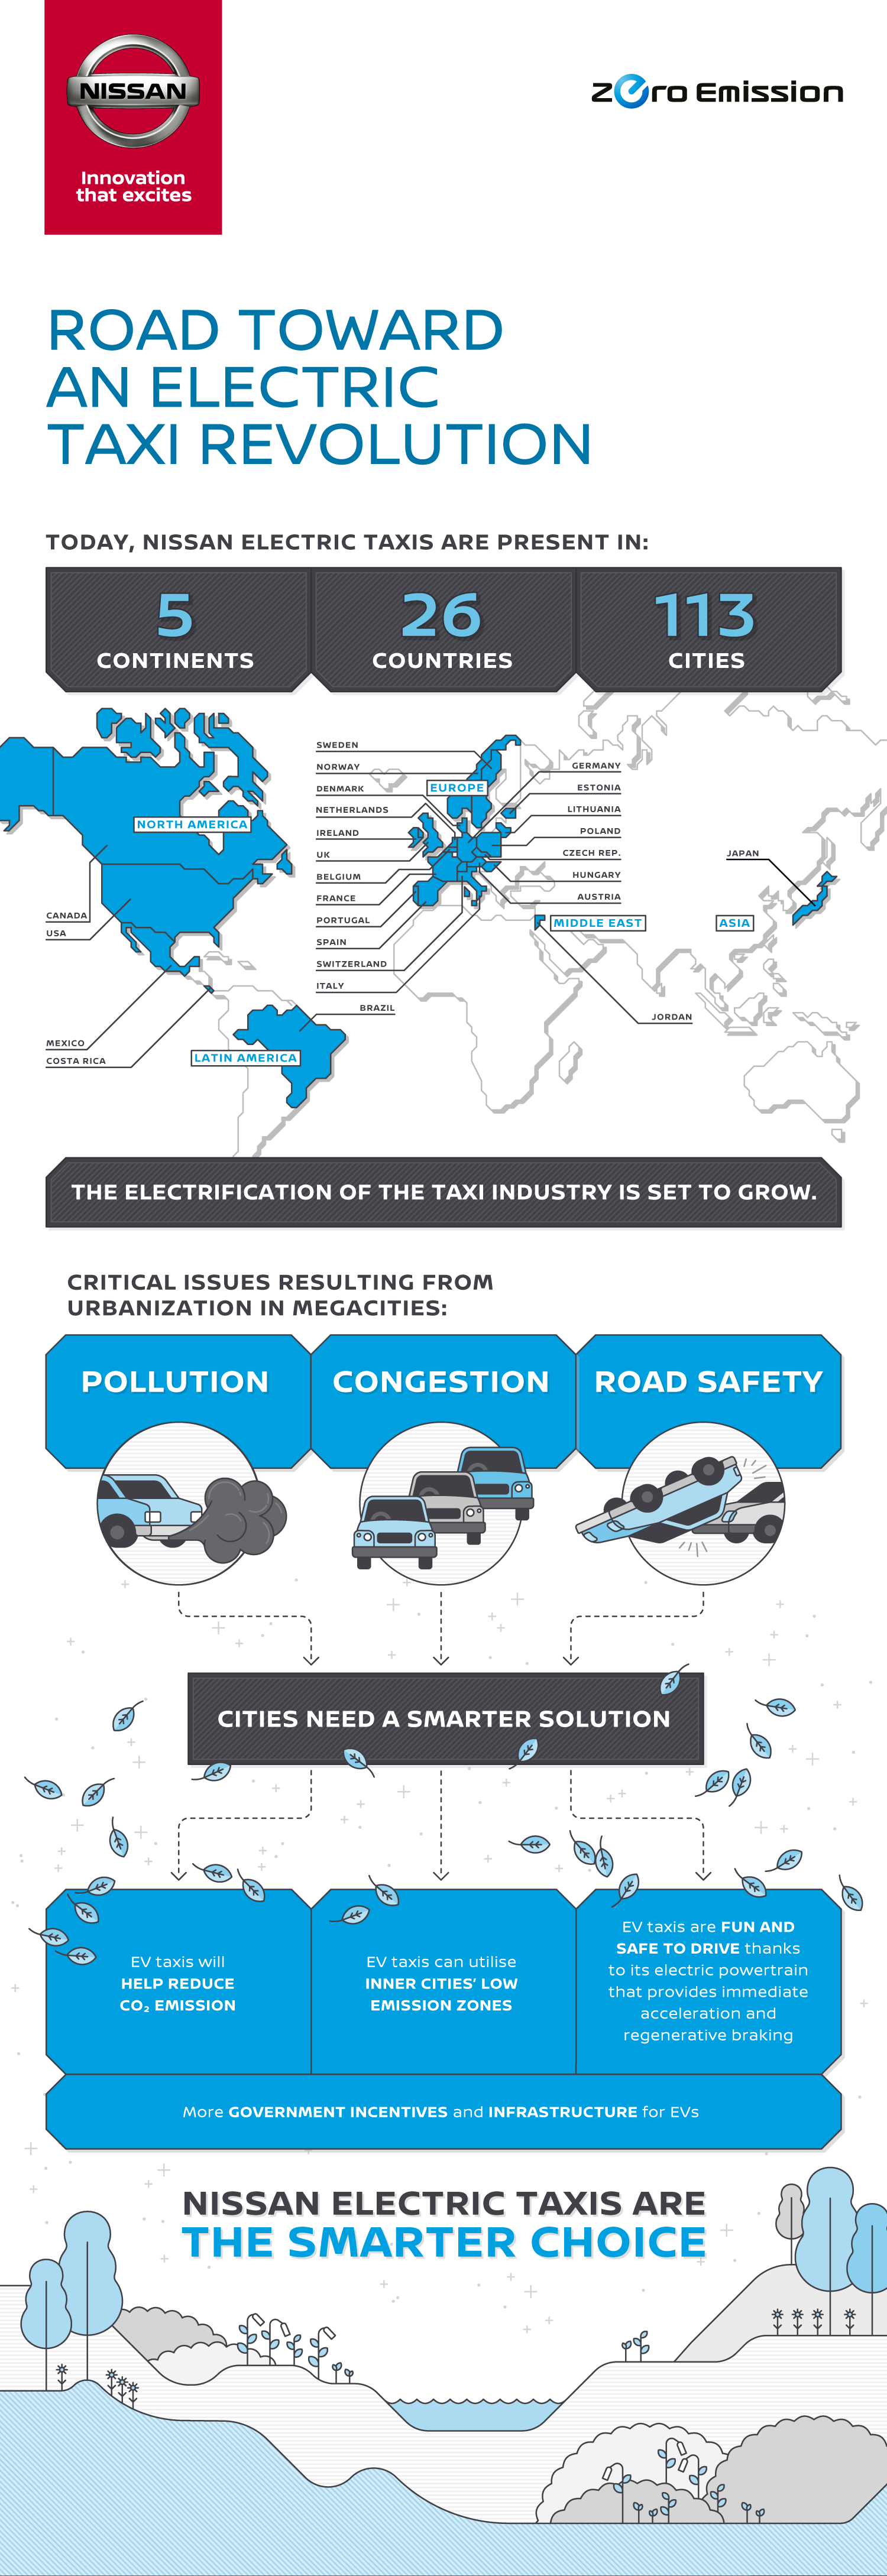 Road Towards an Electric Taxi Revolution Infographic | Nissan | Makemark